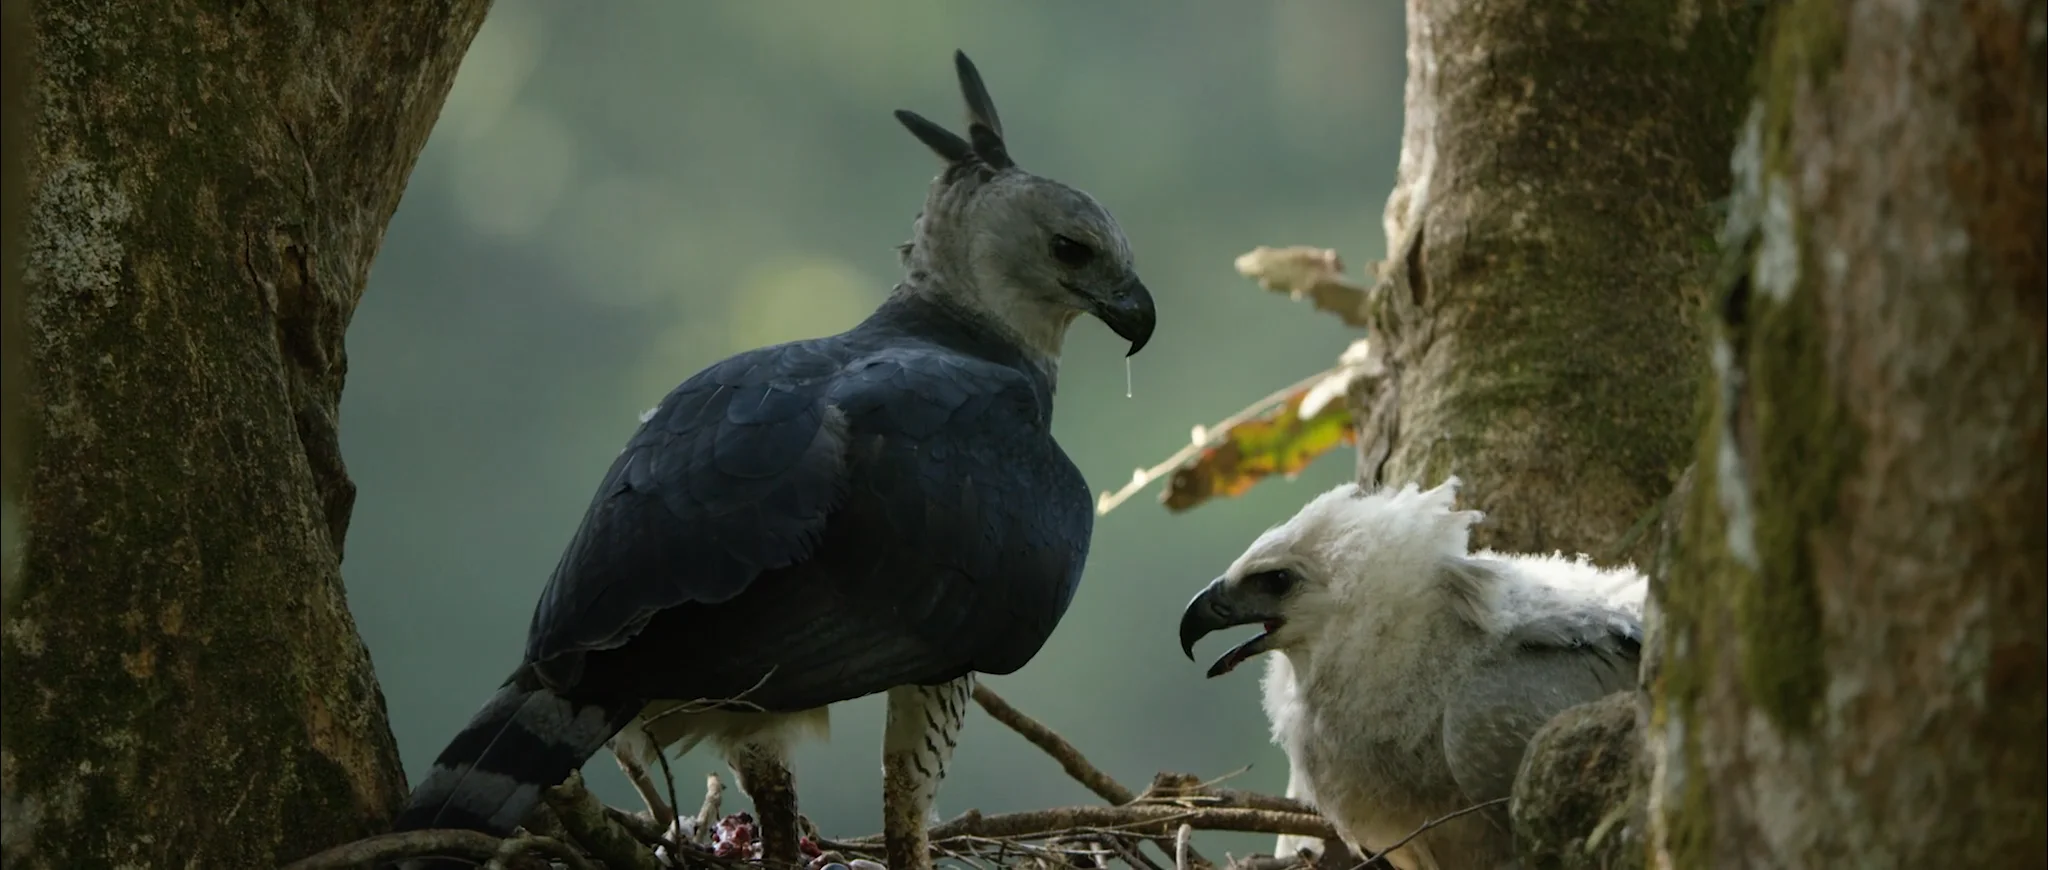 Aguilucho: Dance of the Harpy Eagle - Trailer on Vimeo